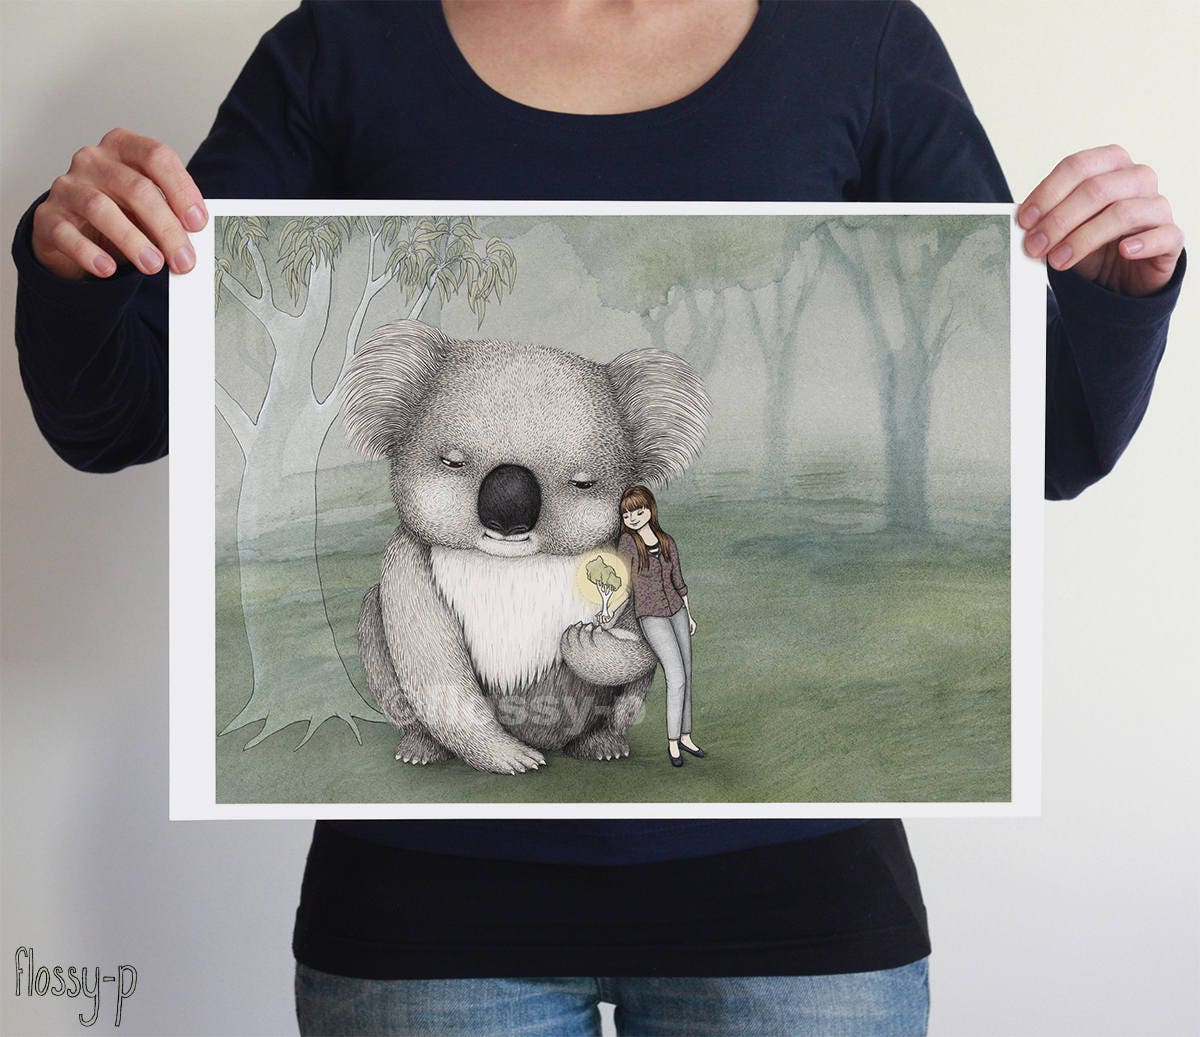 Giant Koala, large A3 full colour art print by flossy-p. Australian gift  with original art by flossy-p